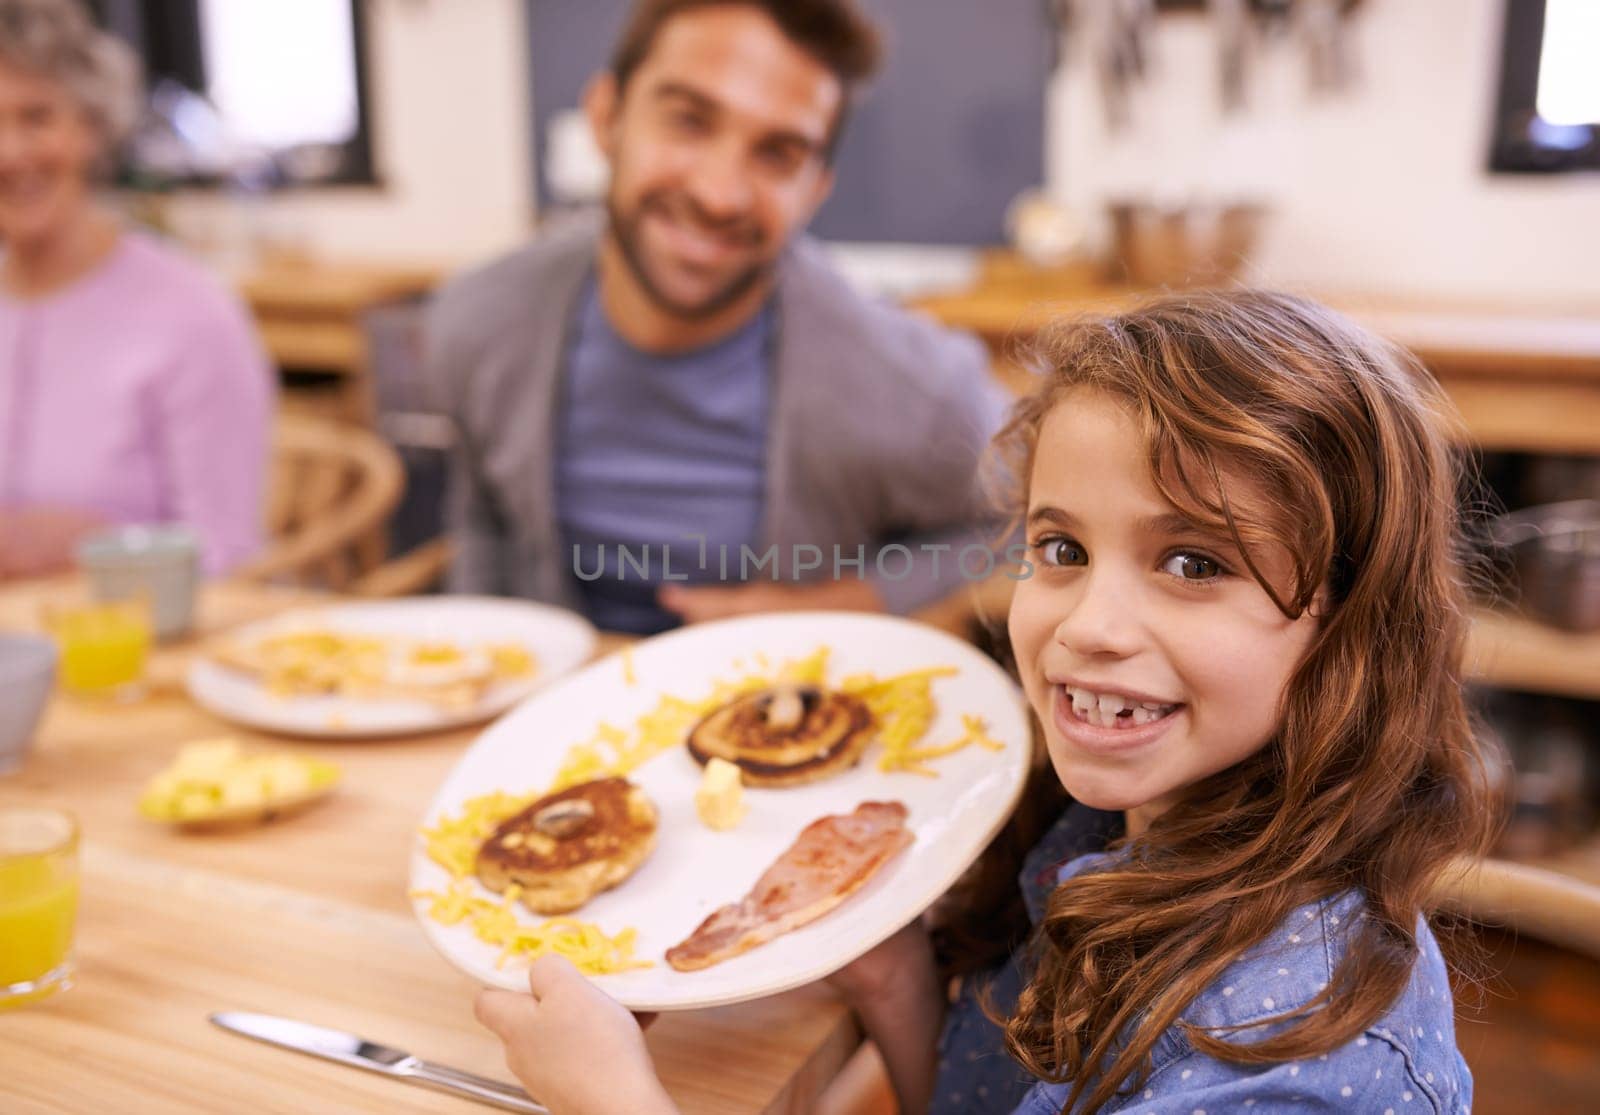 Portrait, child and breakfast in kitchen in home with family, eating and bonding together at table. Food, pancakes and father or grandmother with waffle for brunch nutrition or communication at house.